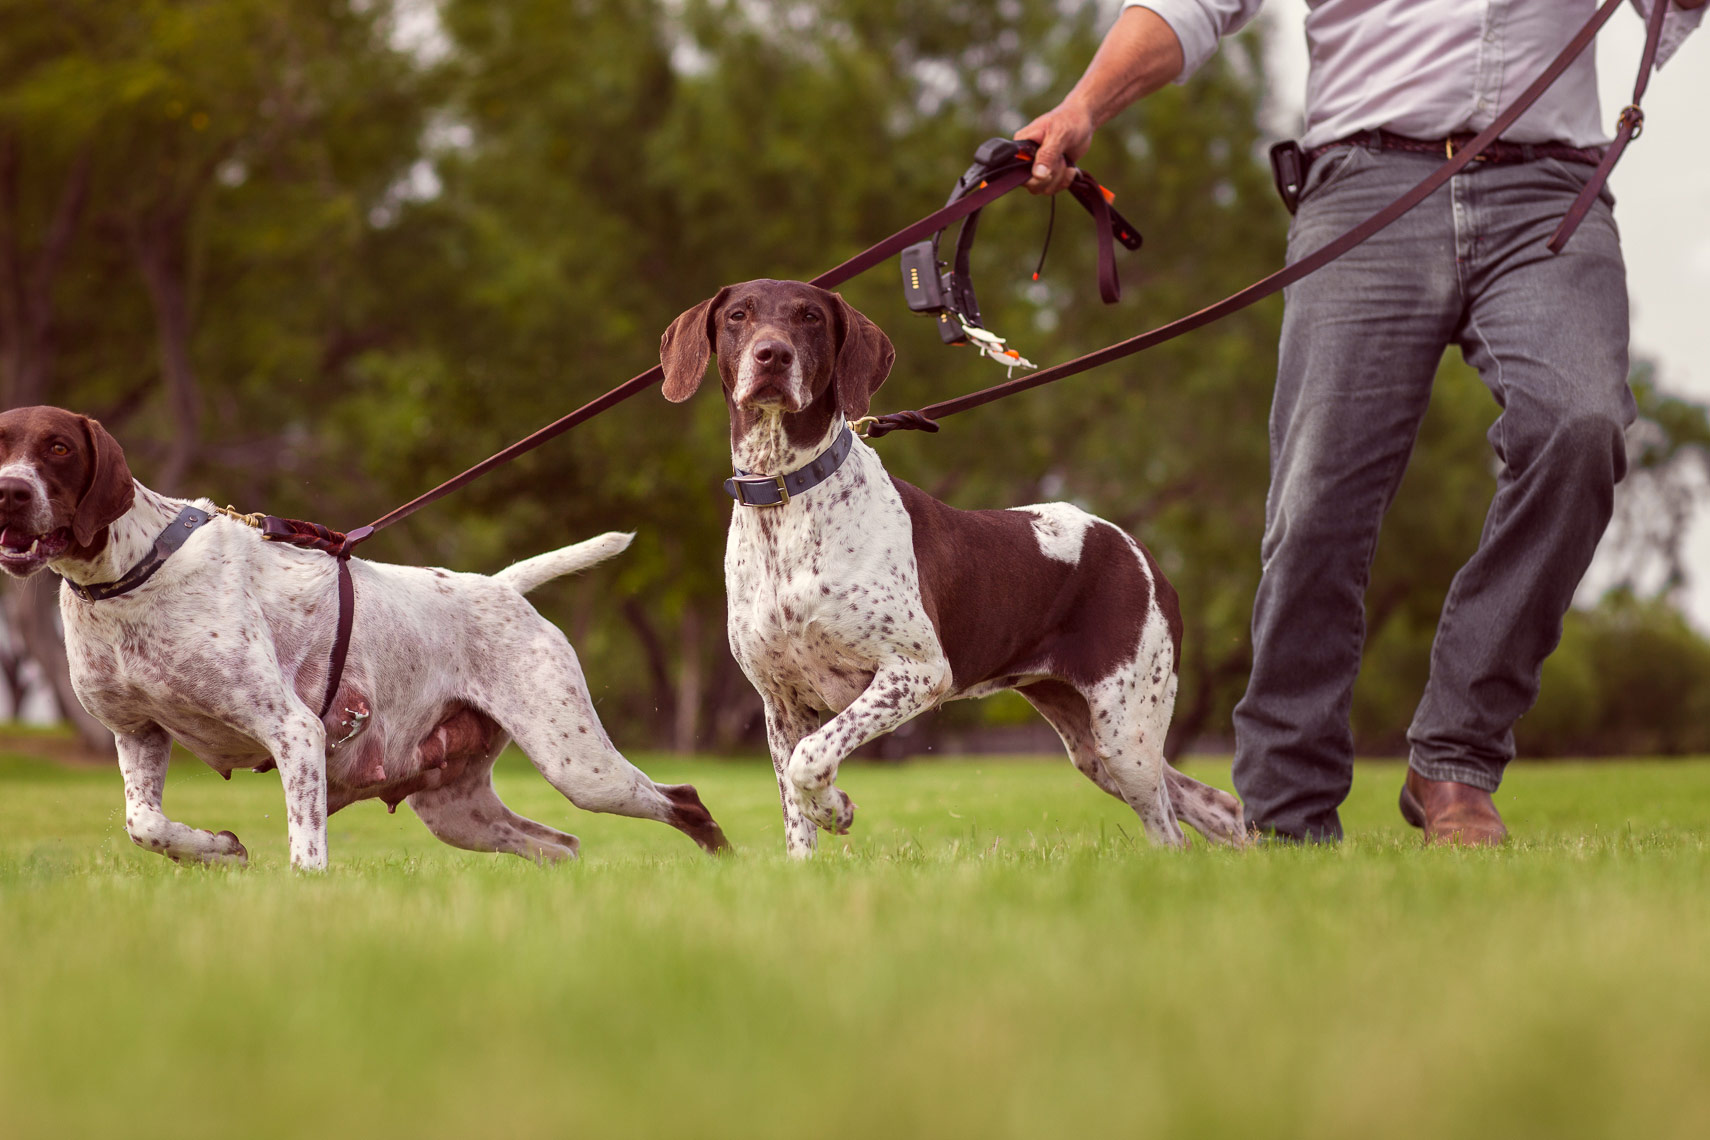 Lifestyle Photograph of  Dogs by Jason Risner for HK Kennels 